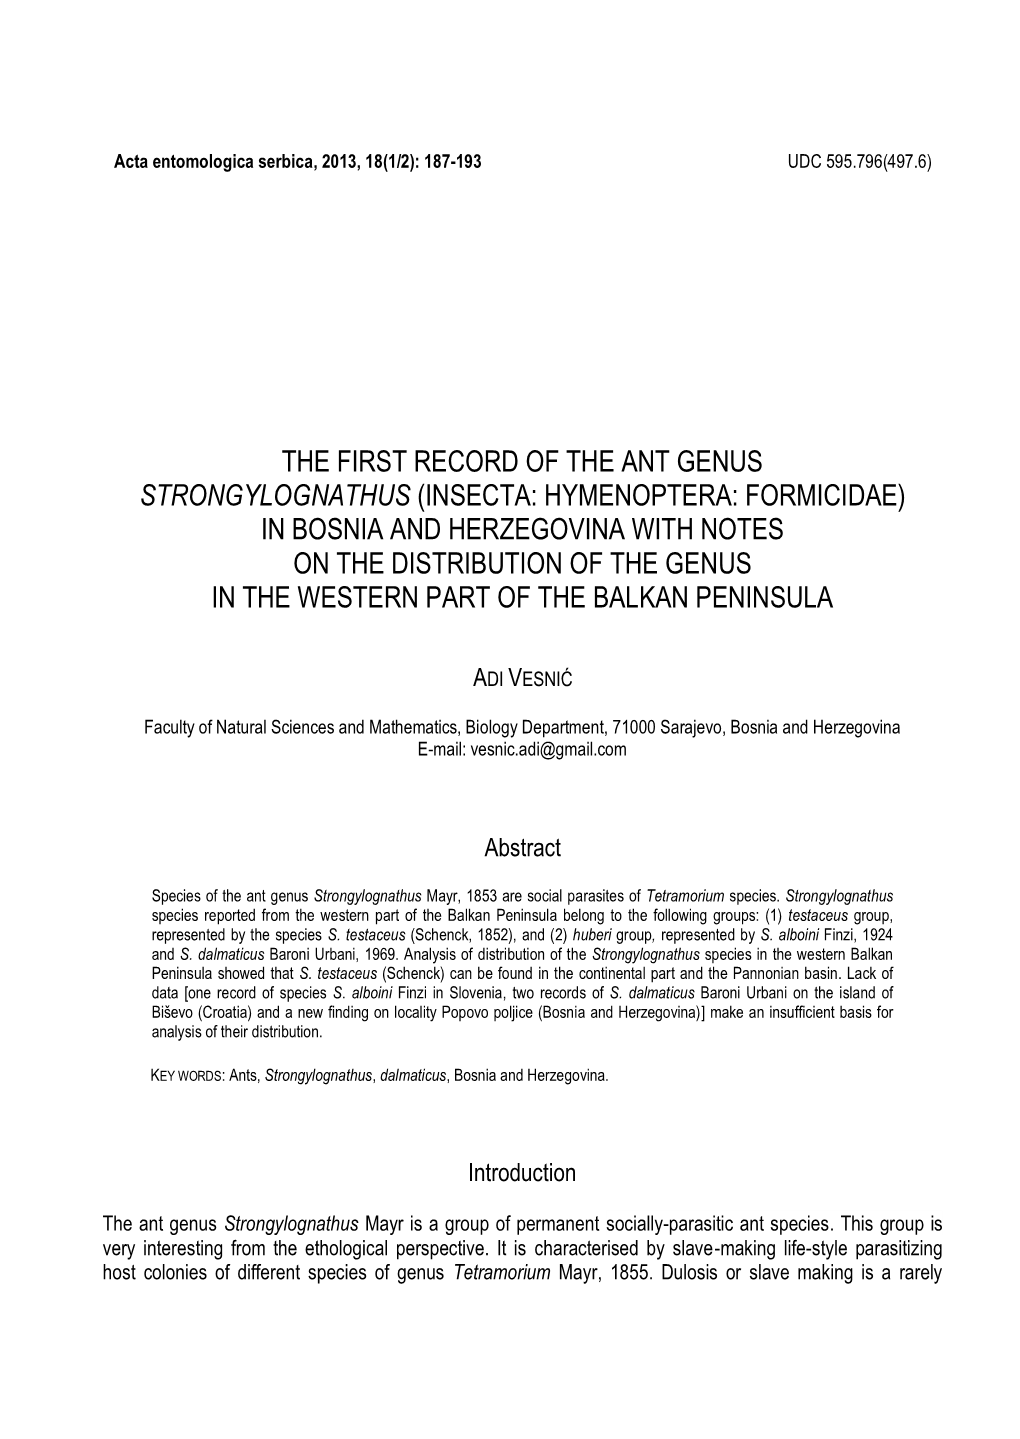 Insecta: Hymenoptera: Formicidae) in Bosnia and Herzegovina with Notes on the Distribution of the Genus in the Western Part of the Balkan Peninsula